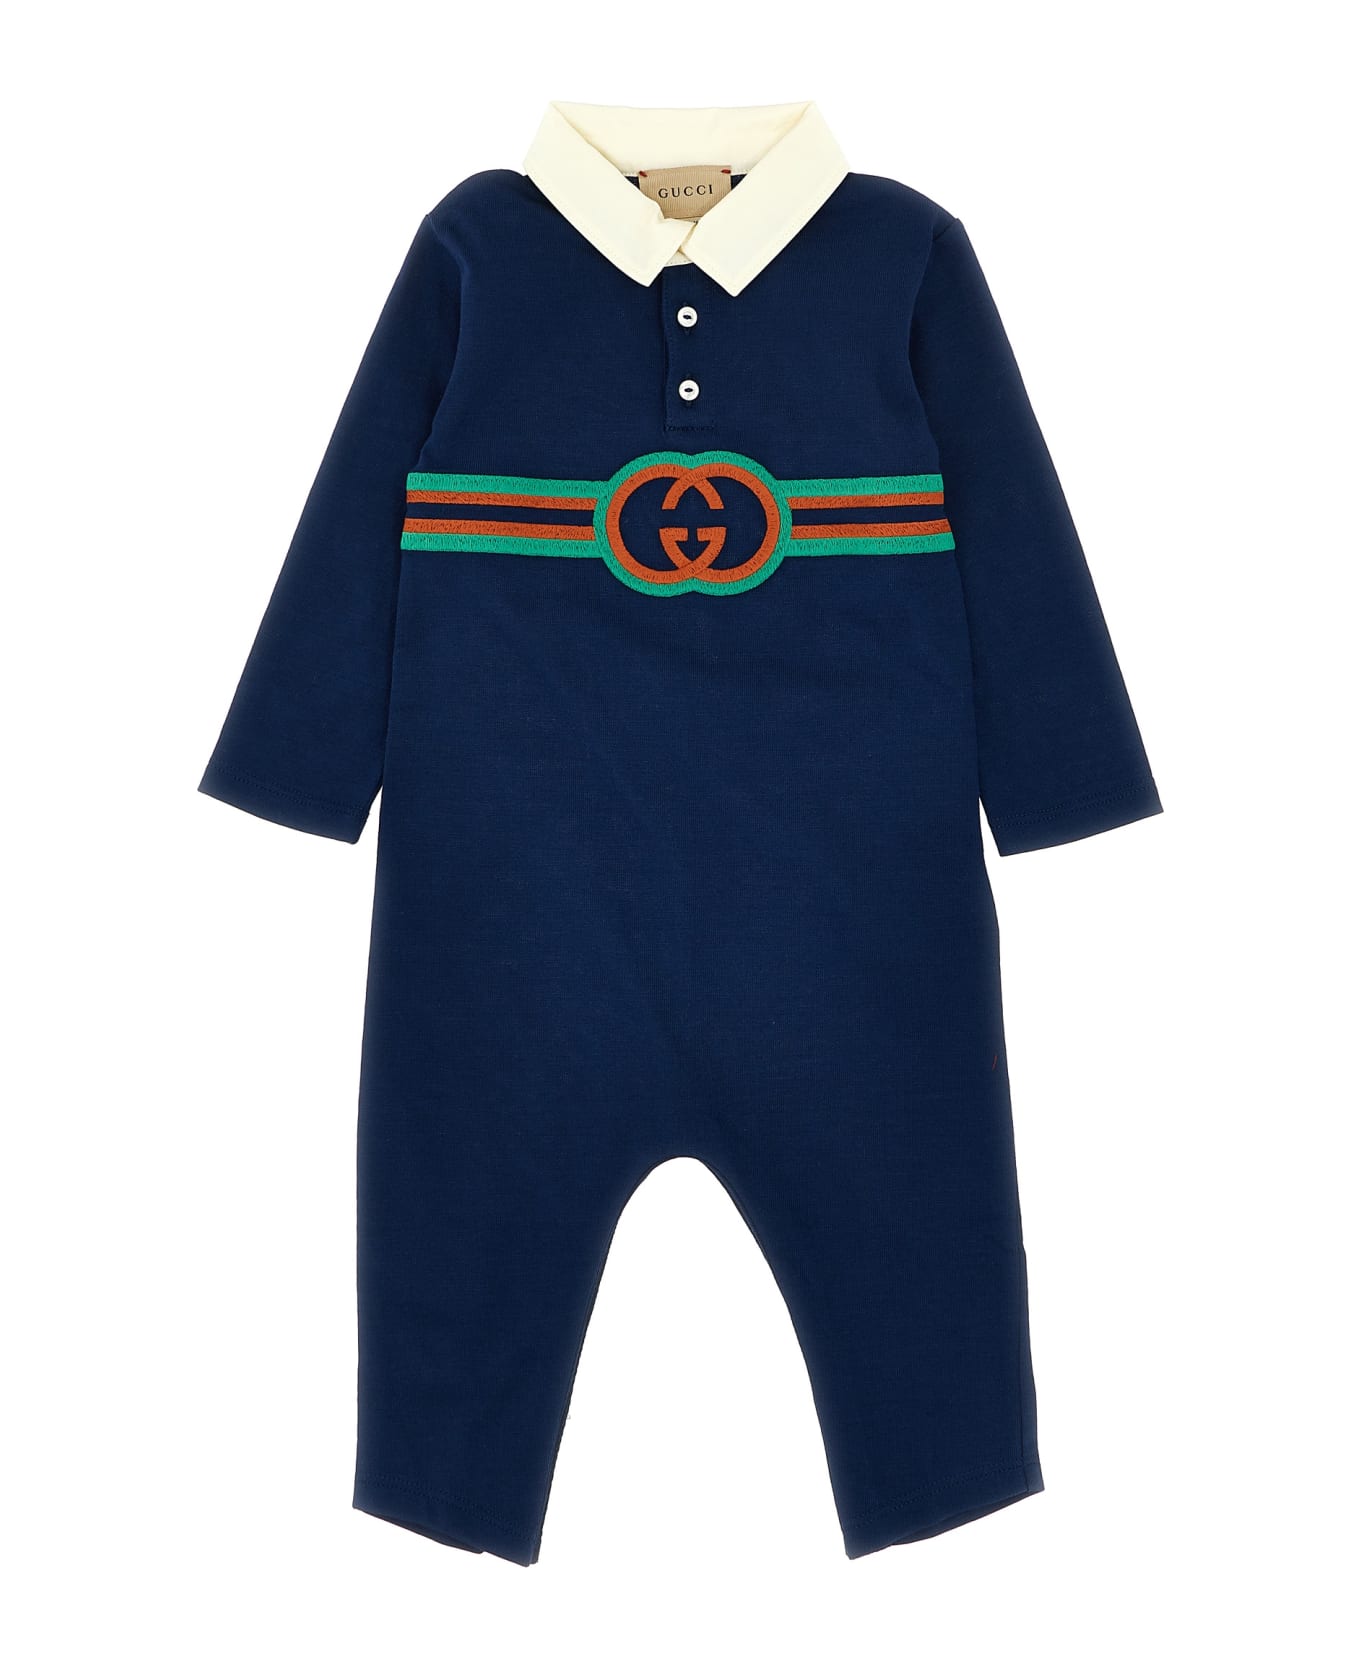 Gucci Logo Embroidery Jumpsuit - Blue